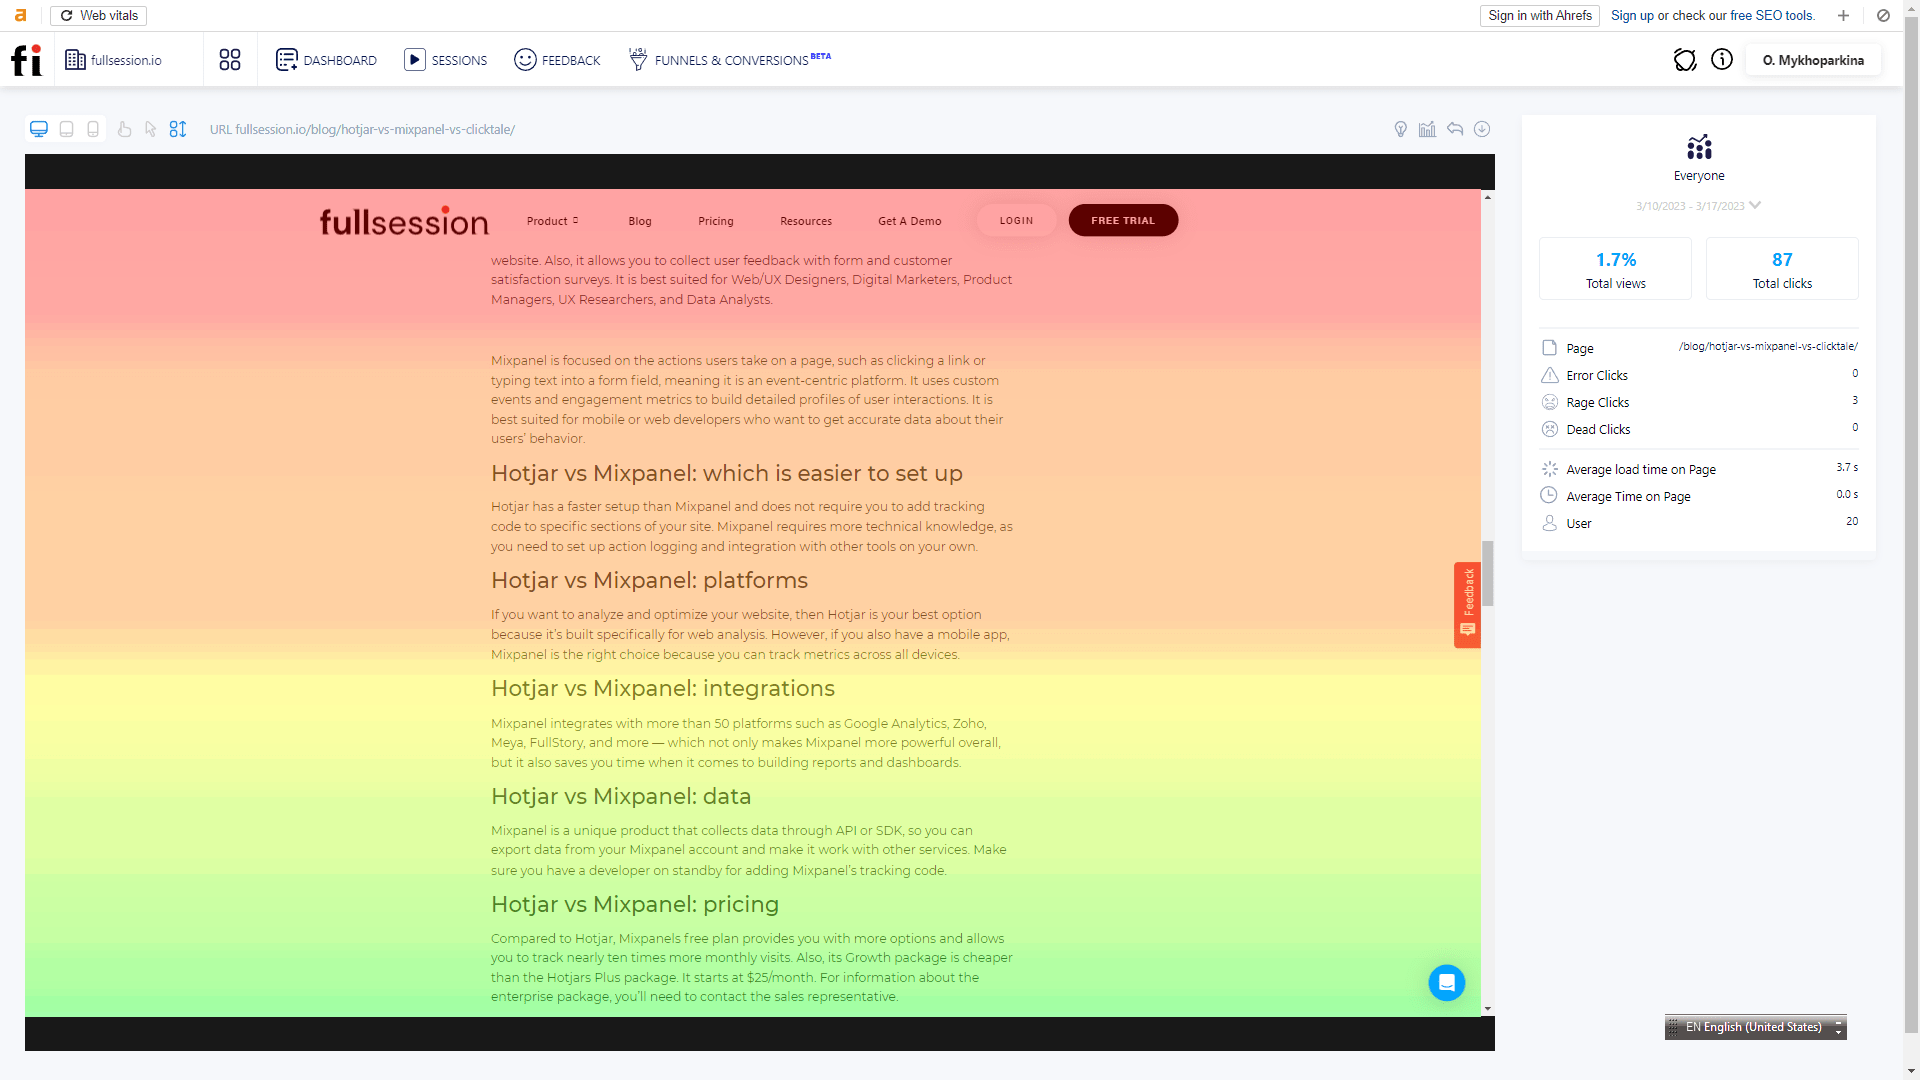 fullsession page with heatmap colors